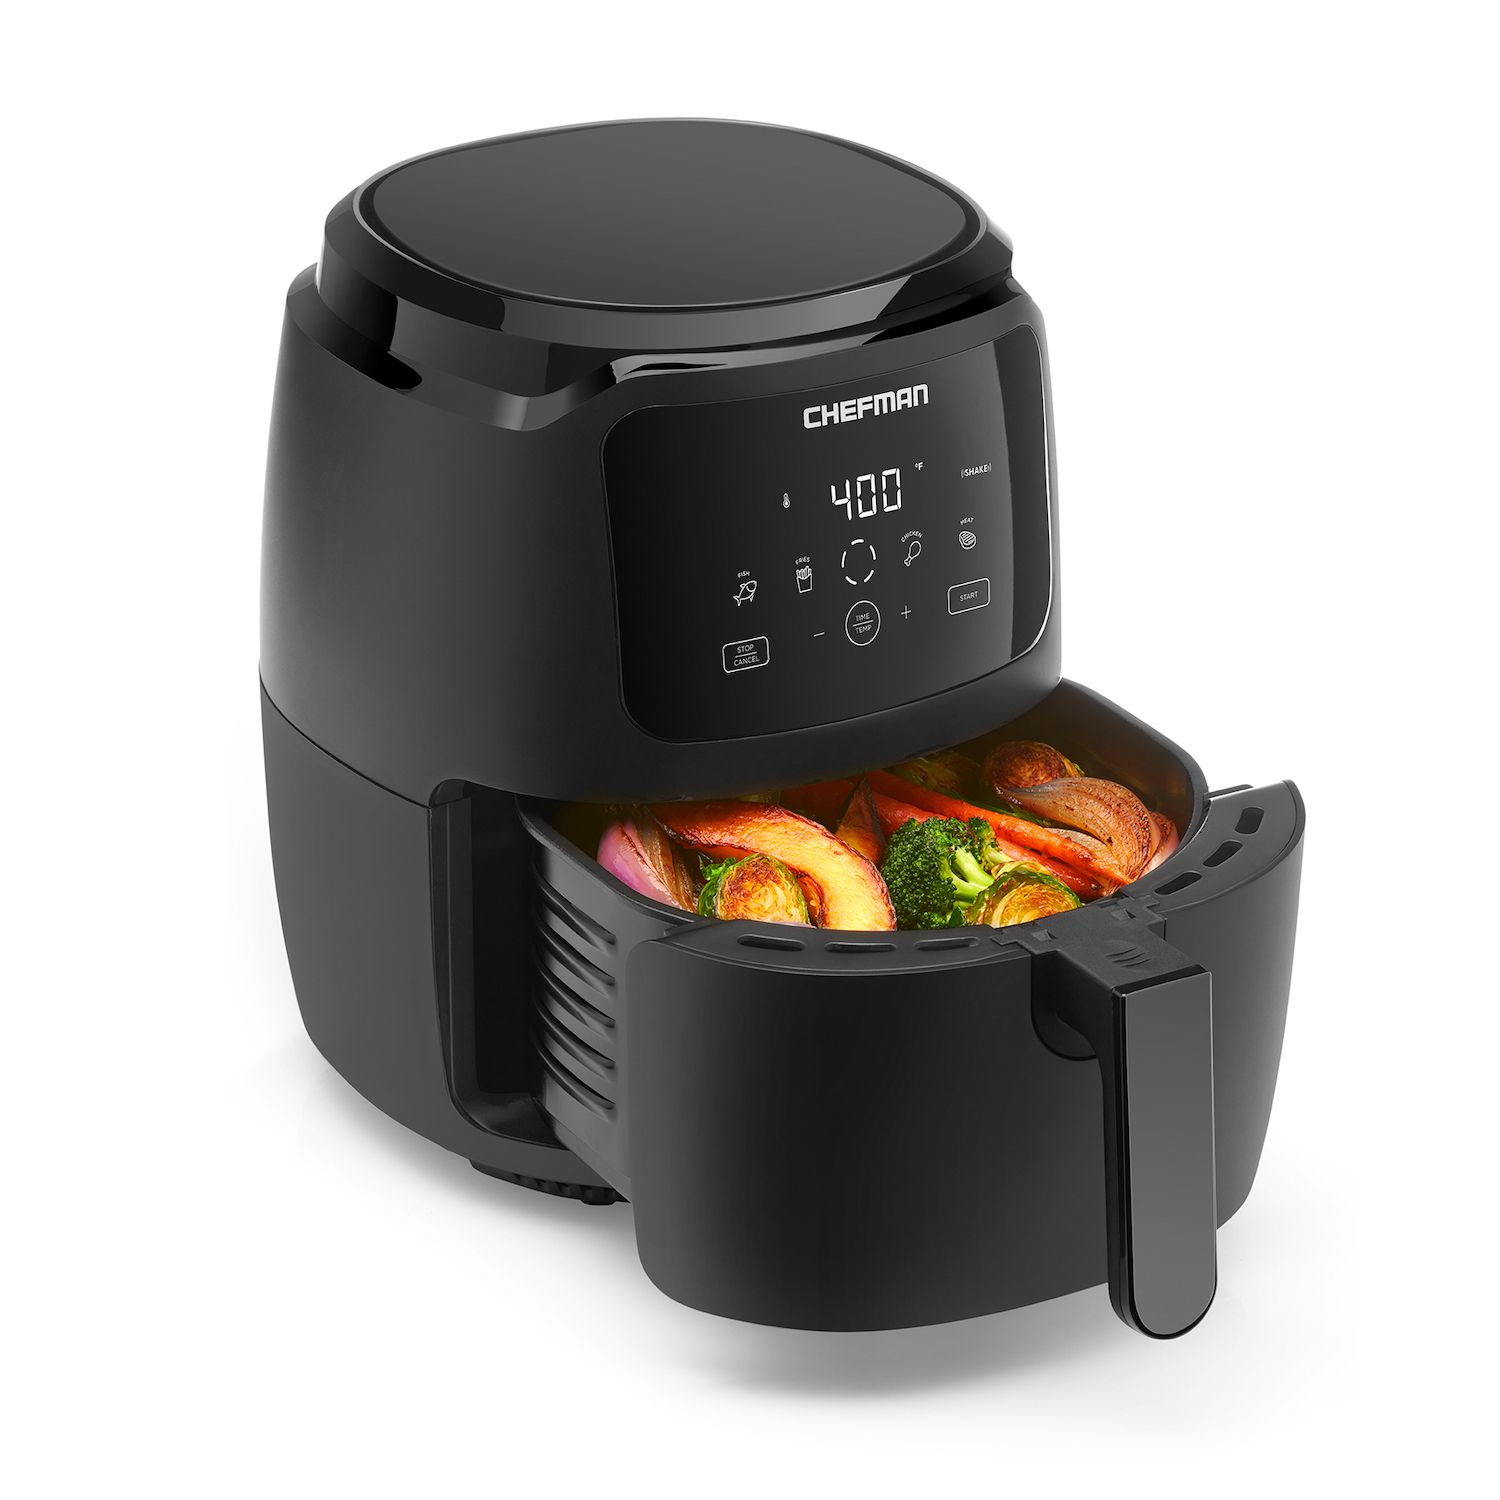 West Bend 10 Qt. Double UP™ Air Fryer with 15 Presets and Easy-View Windows